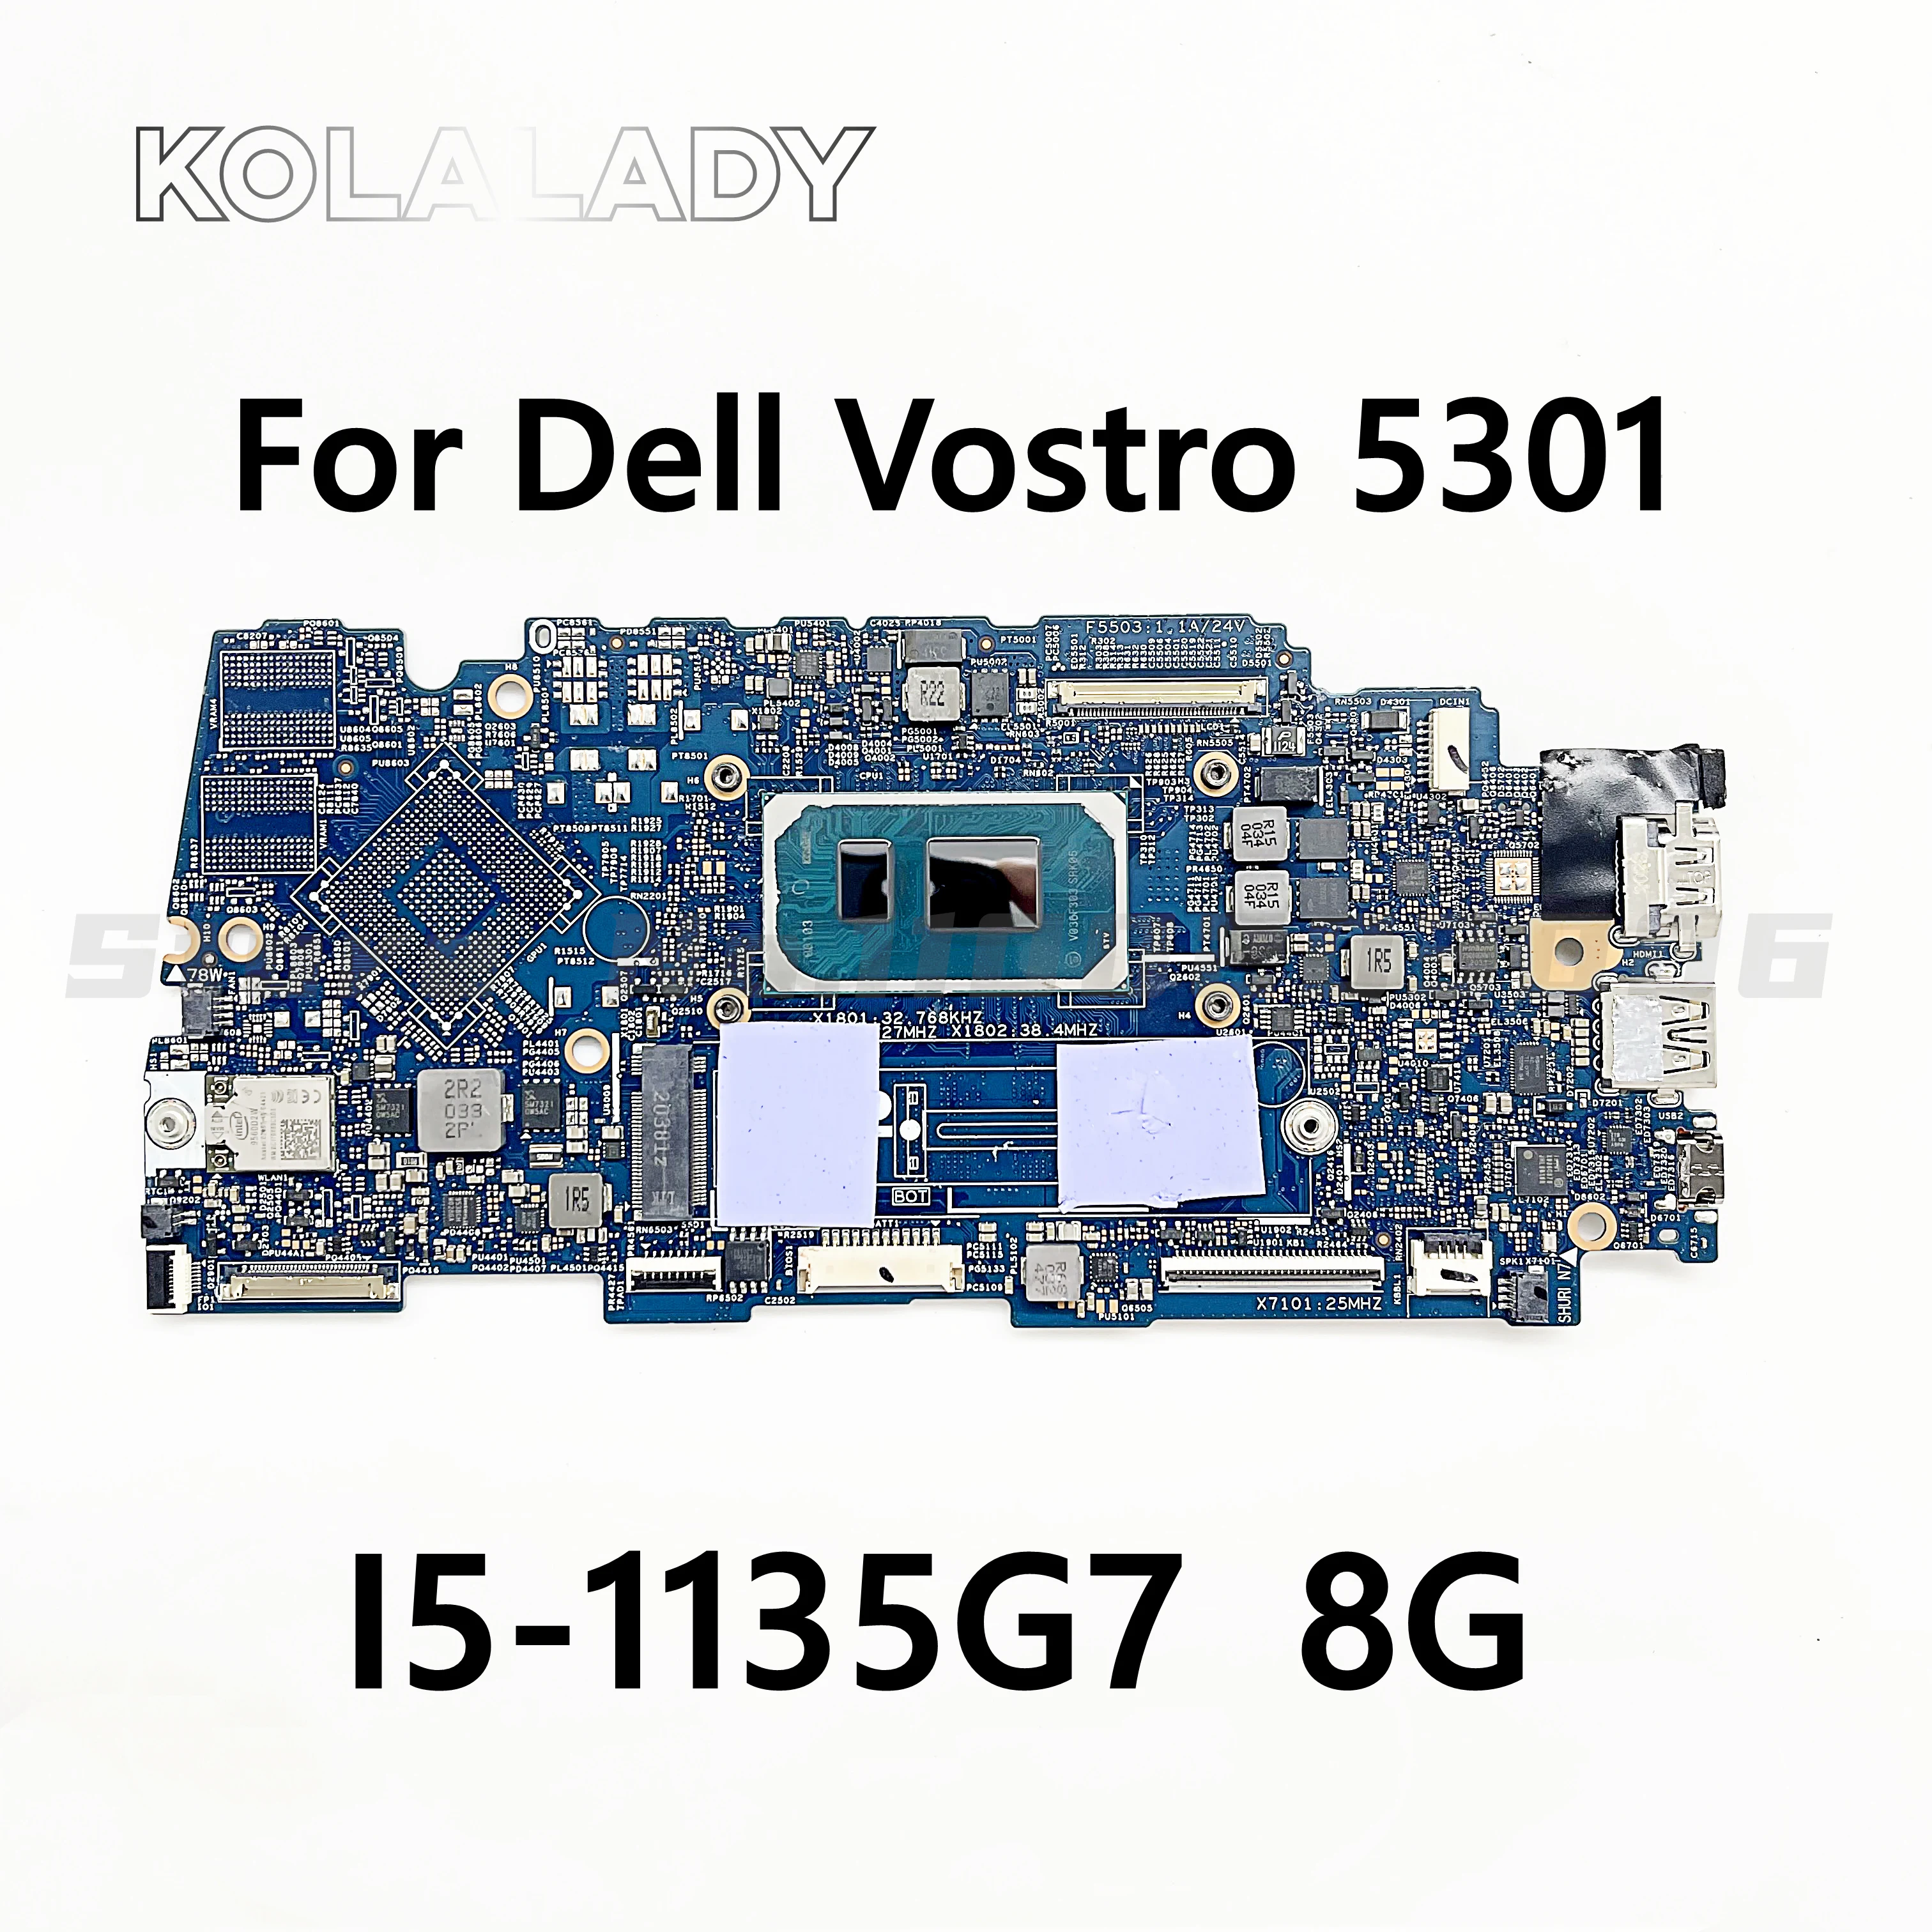 

For Dell Vostro 5301 Laptop Motherboard With i5-1135G7 CPU 8GB-RAM 2W1D5 19765-1 Mainboard CN-071W1W 71W1W 100% Fully Tested